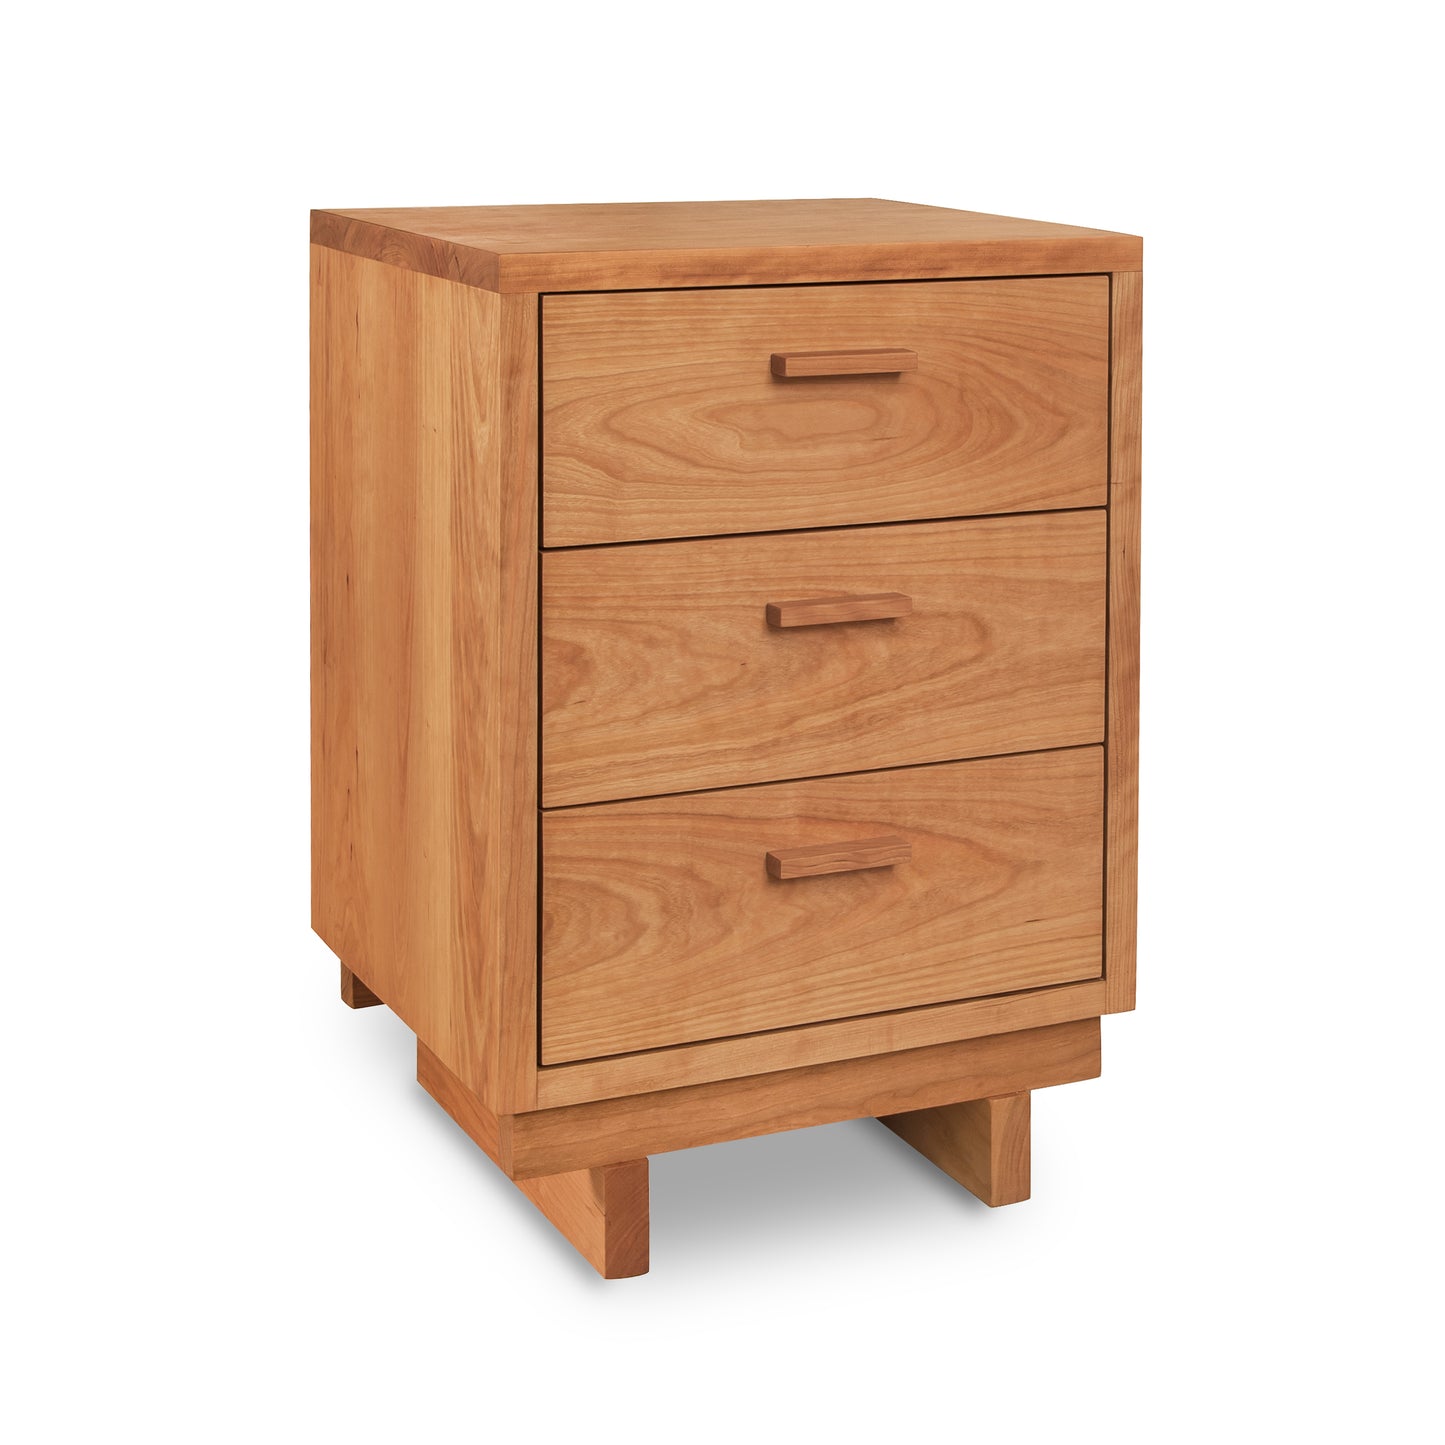 A Vermont Furniture Designs Loft 3-Drawer Nightstand with solid wood construction isolated on a white background.